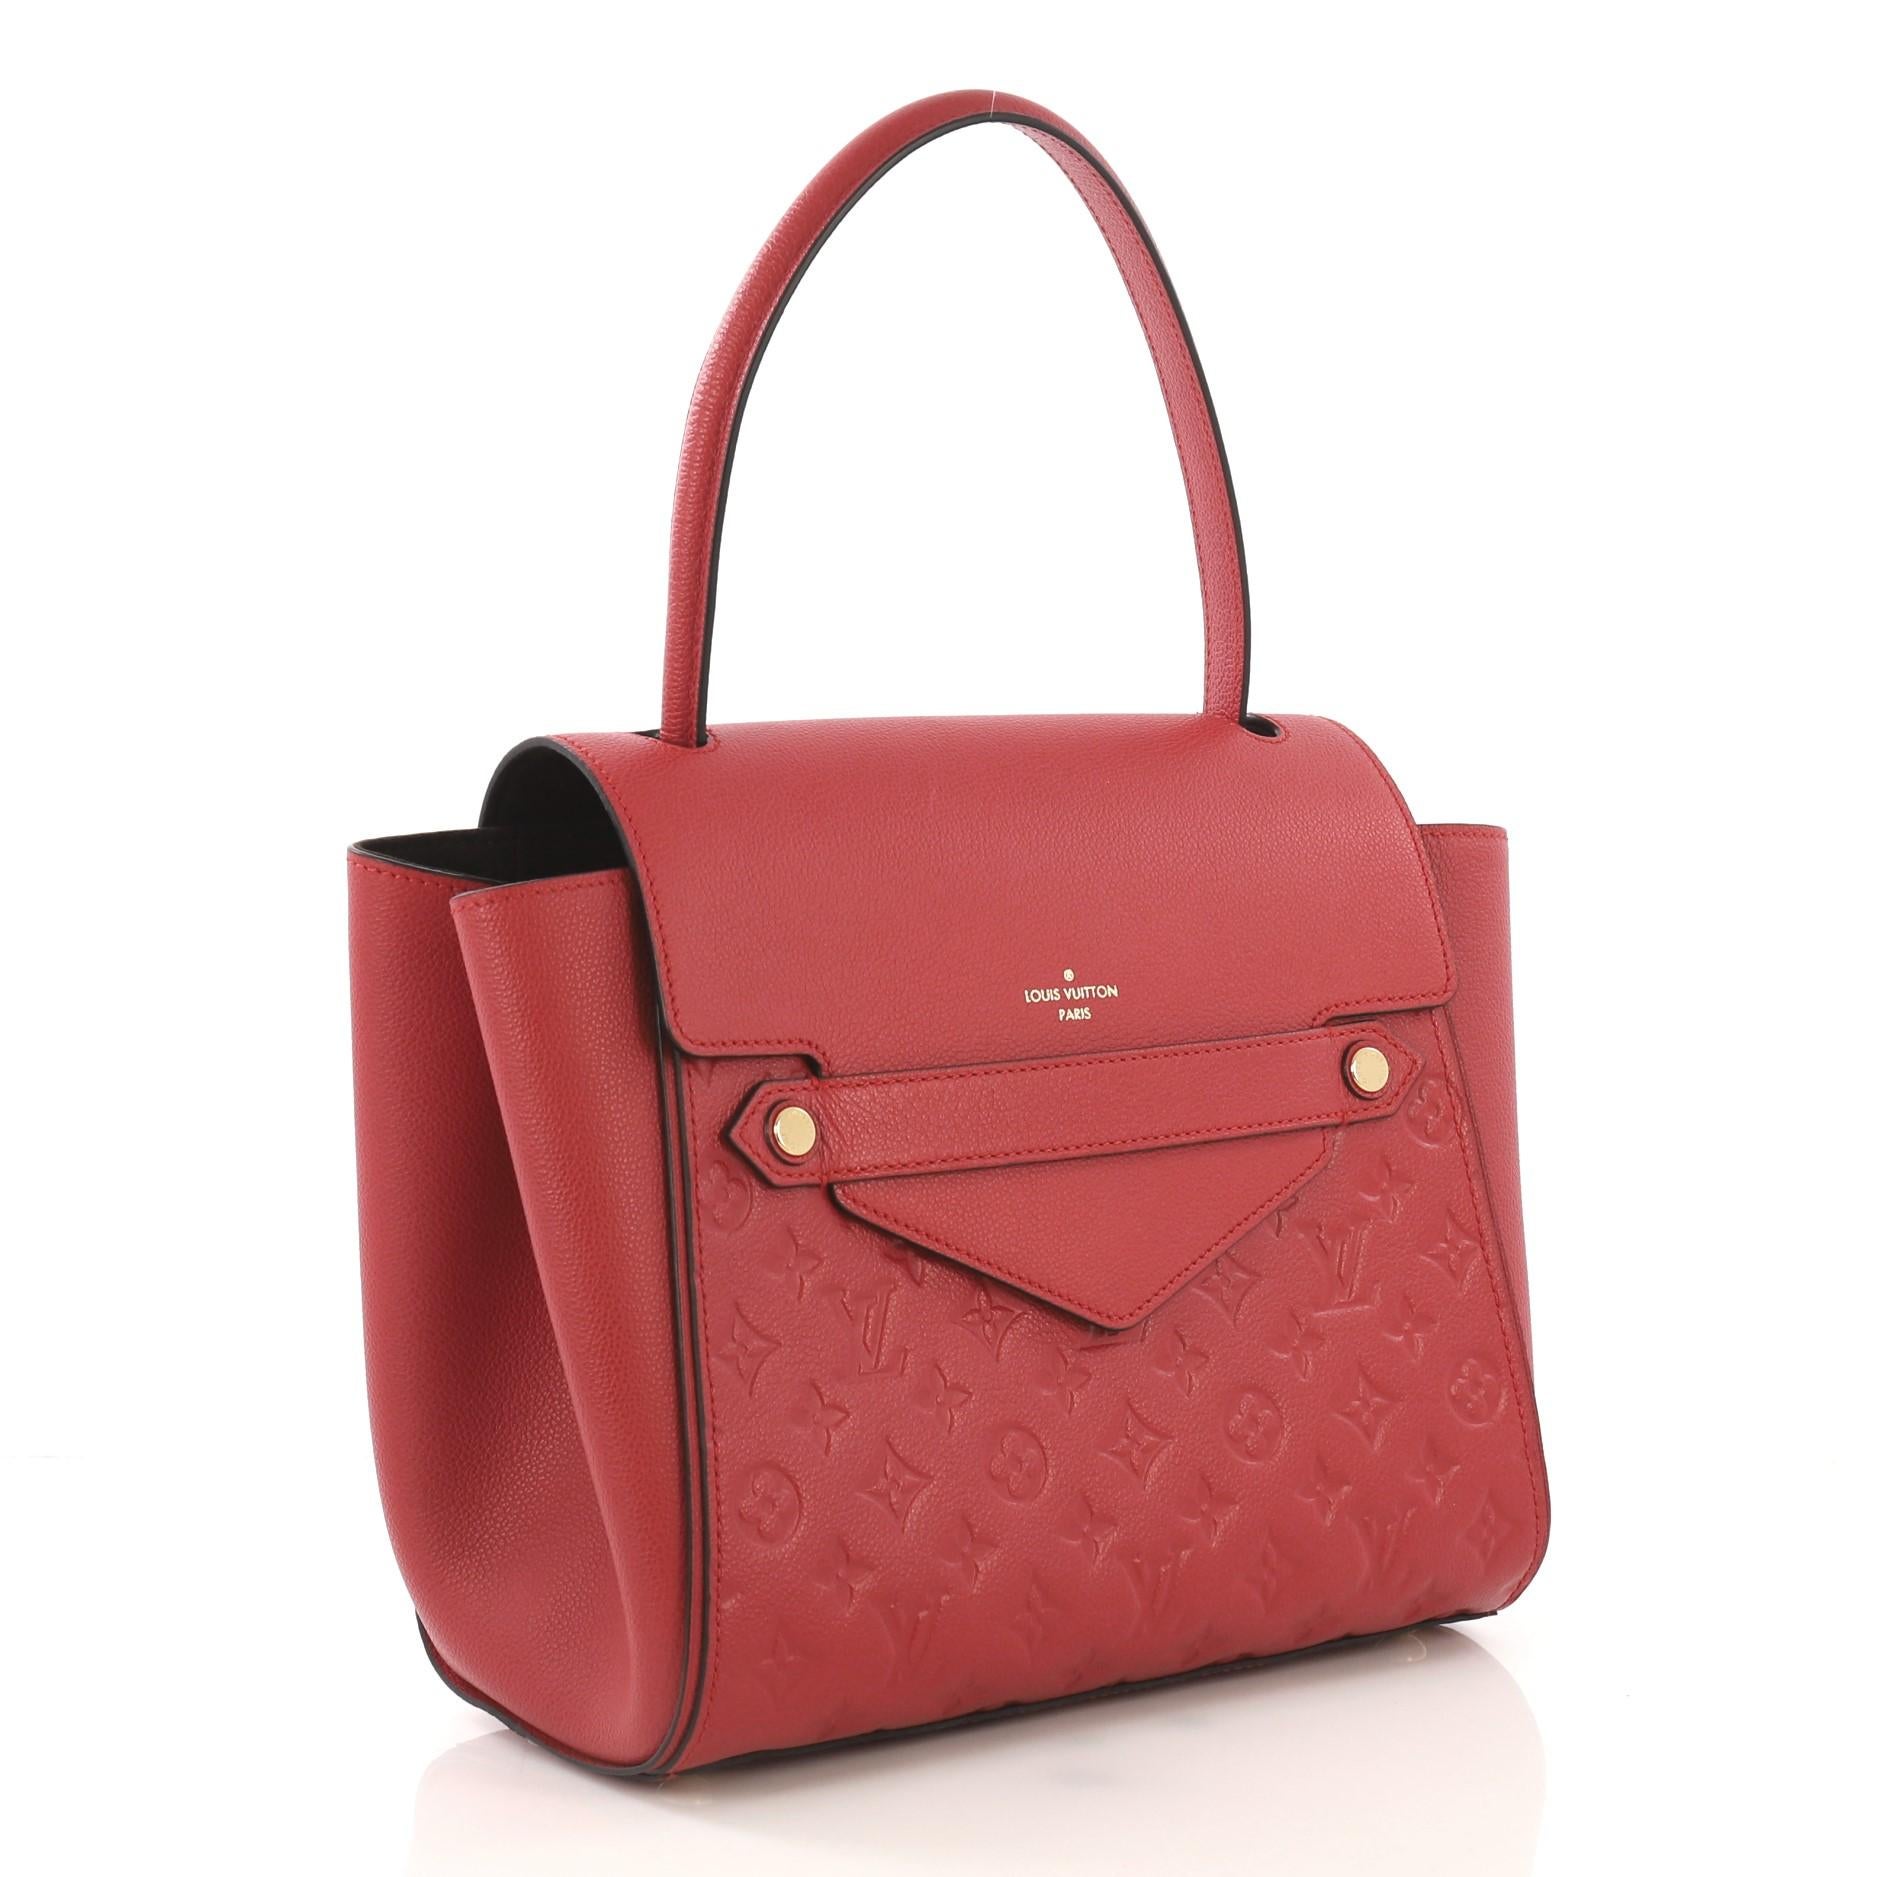 This Louis Vuitton Trocadero Handbag Monogram Empreinte Leather, crafted from red monogram empreinte leather, features a looping top handle, subtle LV logo at front, protective base studs, and gold-tone hardware. Its hidden magnetic closure opens to